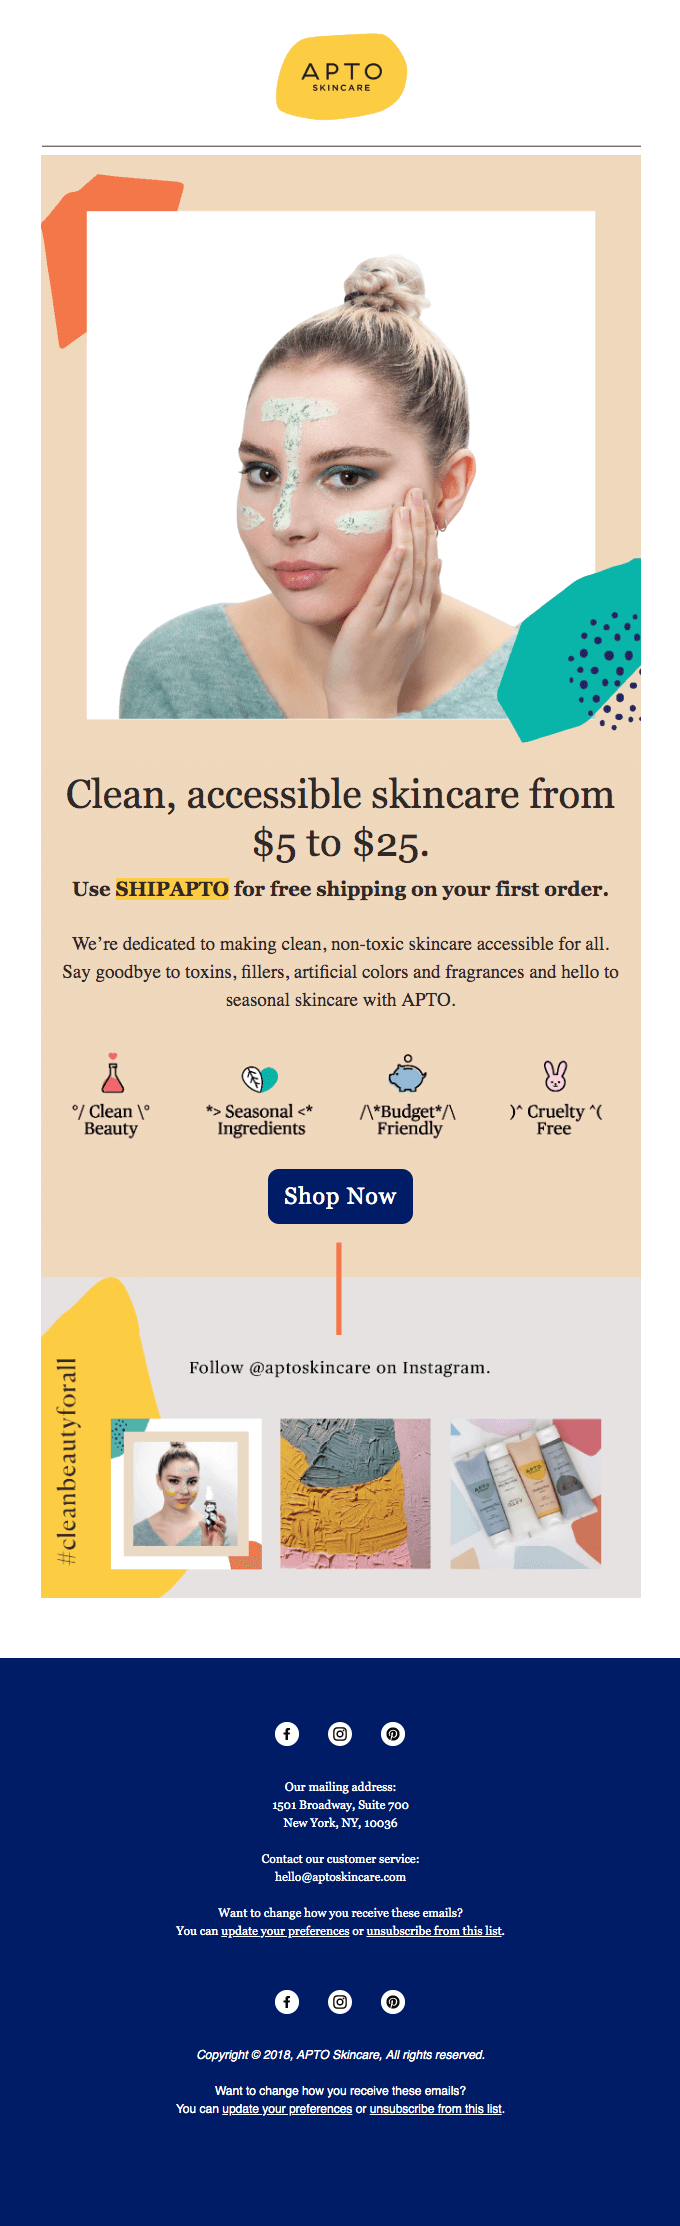 Apto Skincare outlines its value proposition - clean, budget-friendly, and cruelty-free - in its welcome emails. 